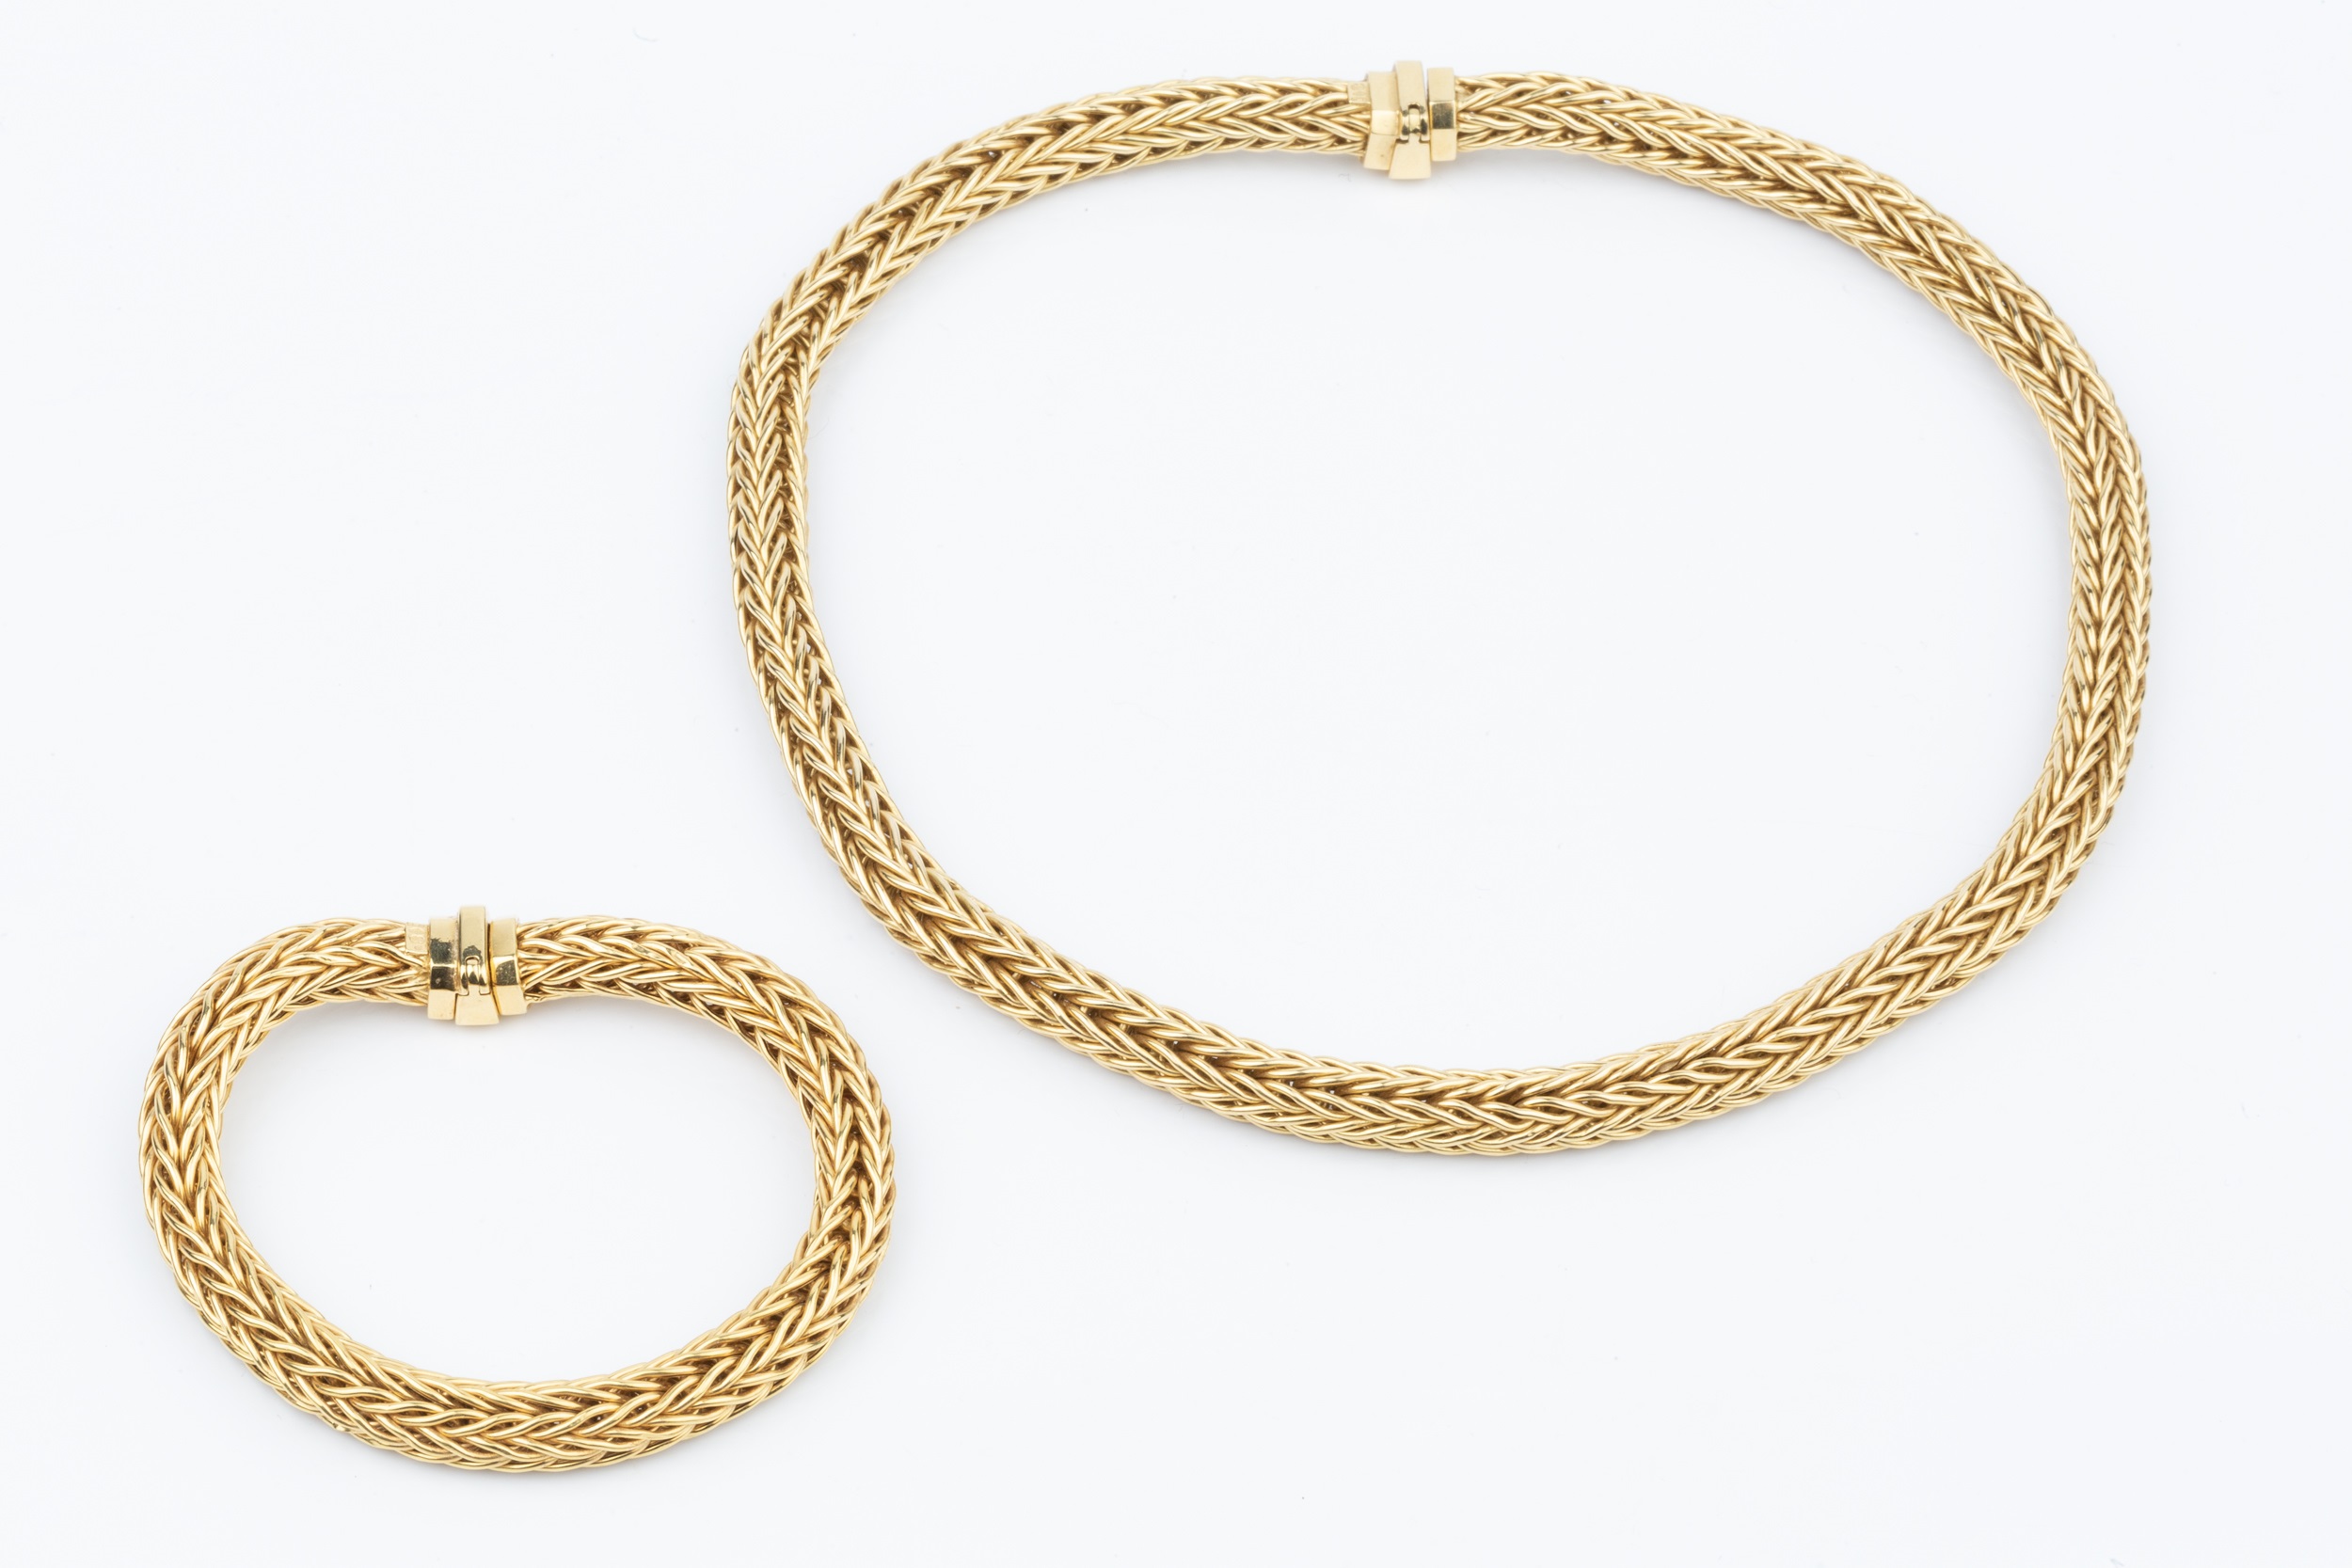 An 18ct gold ropetwist necklace, and matching bracelet, with flexible herringbone links and - Image 2 of 2